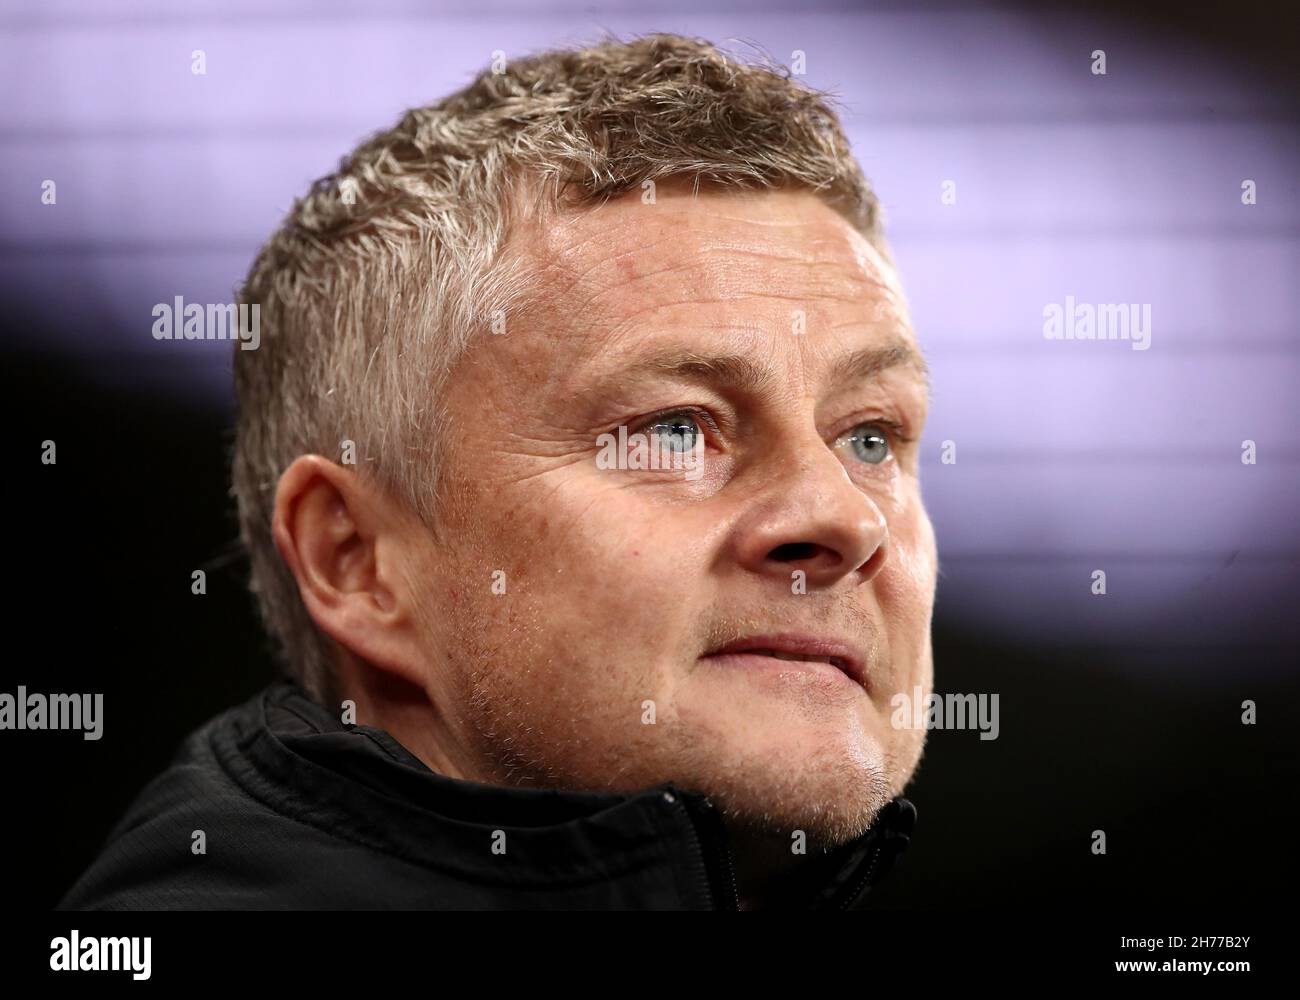 File photo dated 29-01-2020 of Manchester United manager Ole Gunnar Solskjaer, who looks set to leave Manchester United with immediate effect, according to reports. Solskjaer’s position was believed to have been the subject of an emergency board meeting following their 4-1 capitulation at Watford on Saturday.. Issue date: Sunday November 21, 2021. Stock Photo